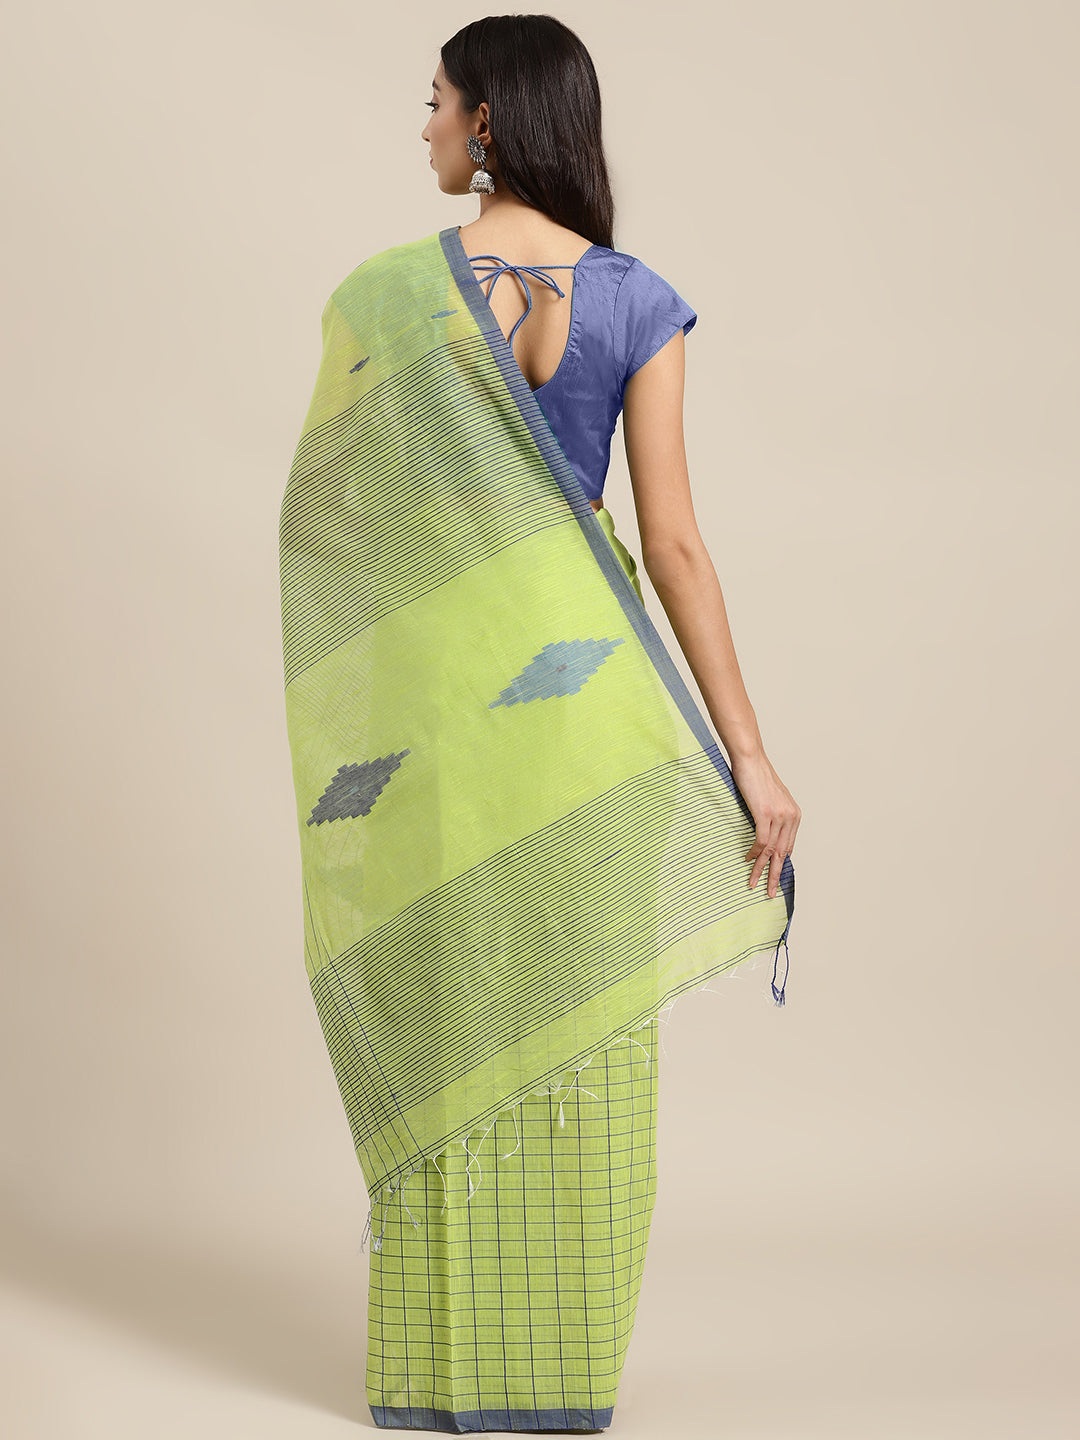 Green and Blue, Kalakari India Ikat Silk Cotton Woven Design Saree with Blouse SHBESA0028-Saree-Kalakari India-SHBESA0028-Bengal, Cotton, Geographical Indication, Hand Crafted, Heritage Prints, Ikkat, Natural Dyes, Red, Sarees, Sustainable Fabrics, Woven, Yellow-[Linen,Ethnic,wear,Fashionista,Handloom,Handicraft,Indigo,blockprint,block,print,Cotton,Chanderi,Blue, latest,classy,party,bollywood,trendy,summer,style,traditional,formal,elegant,unique,style,hand,block,print, dabu,booti,gift,present,gl